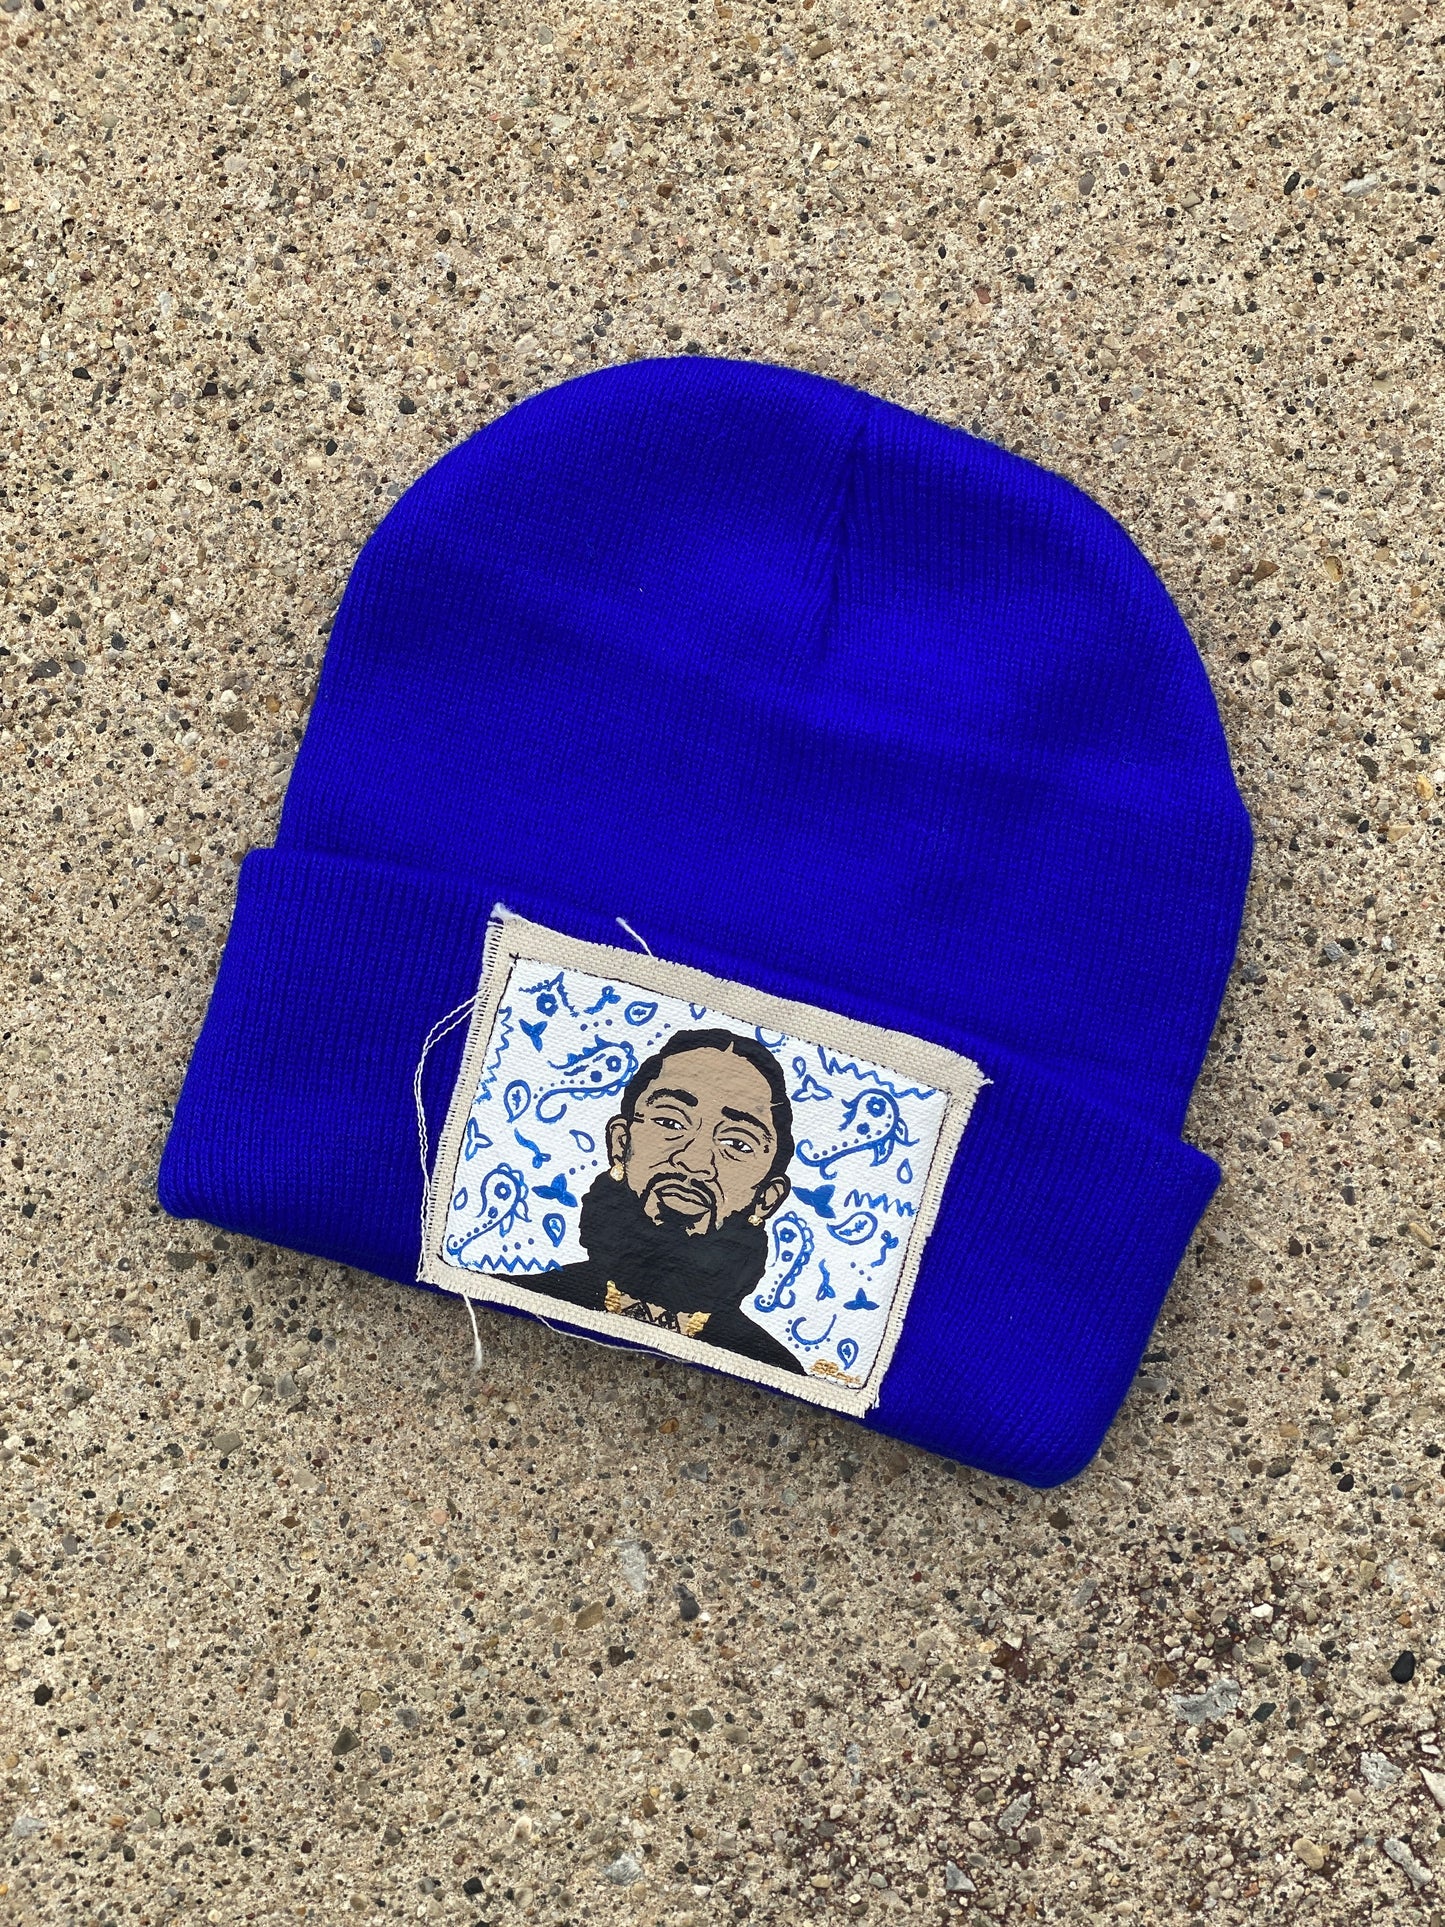 Nipsey Hussle Hand Painted Knit hat